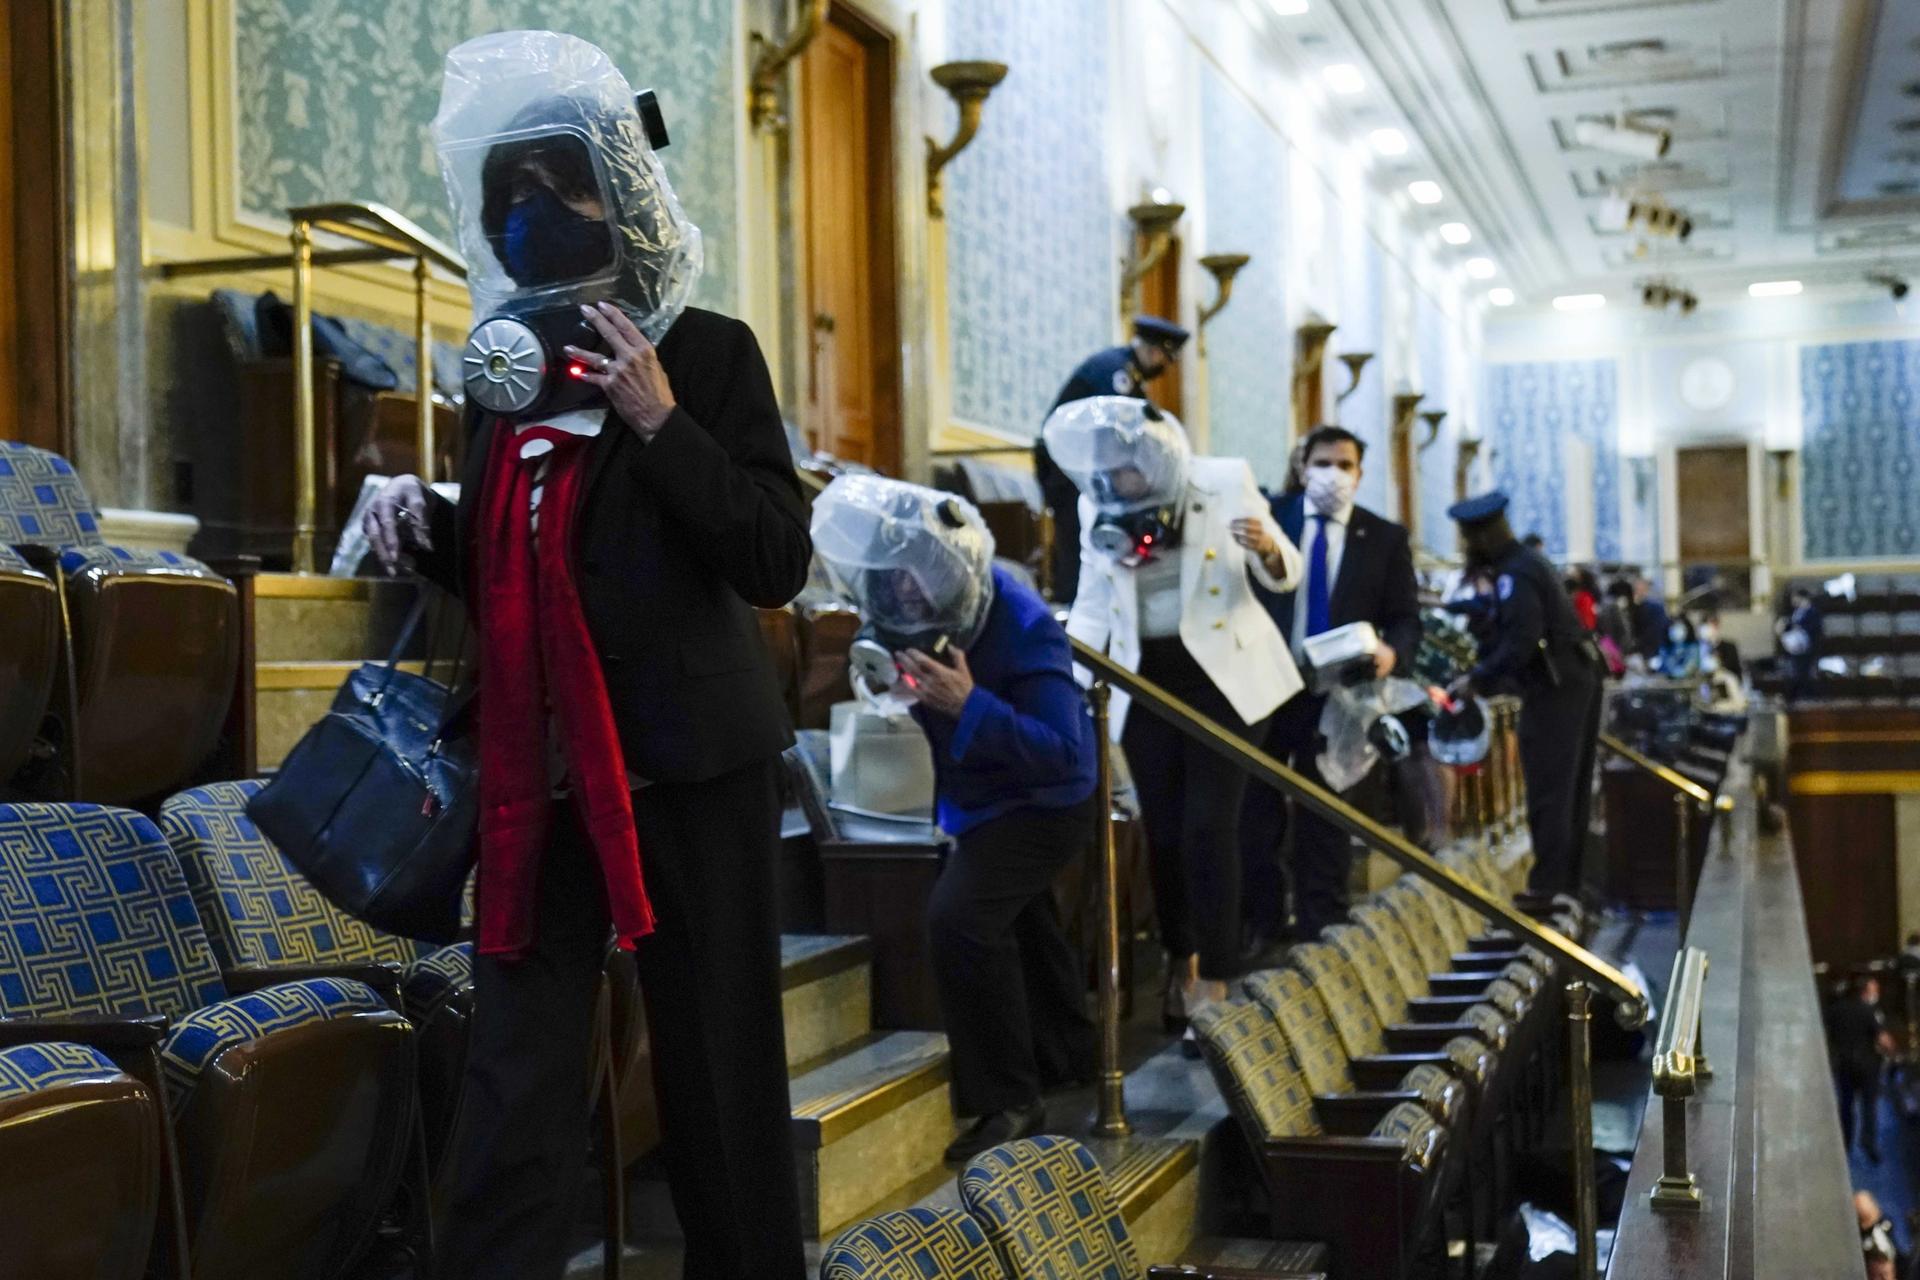 People wearing plastic protection around their heads shelter in the House gallery as a mob of Trump supporters try to break into the House chamber at the US Capitol on Wednesday, Jan. 6, 2021, in Washington, DC.